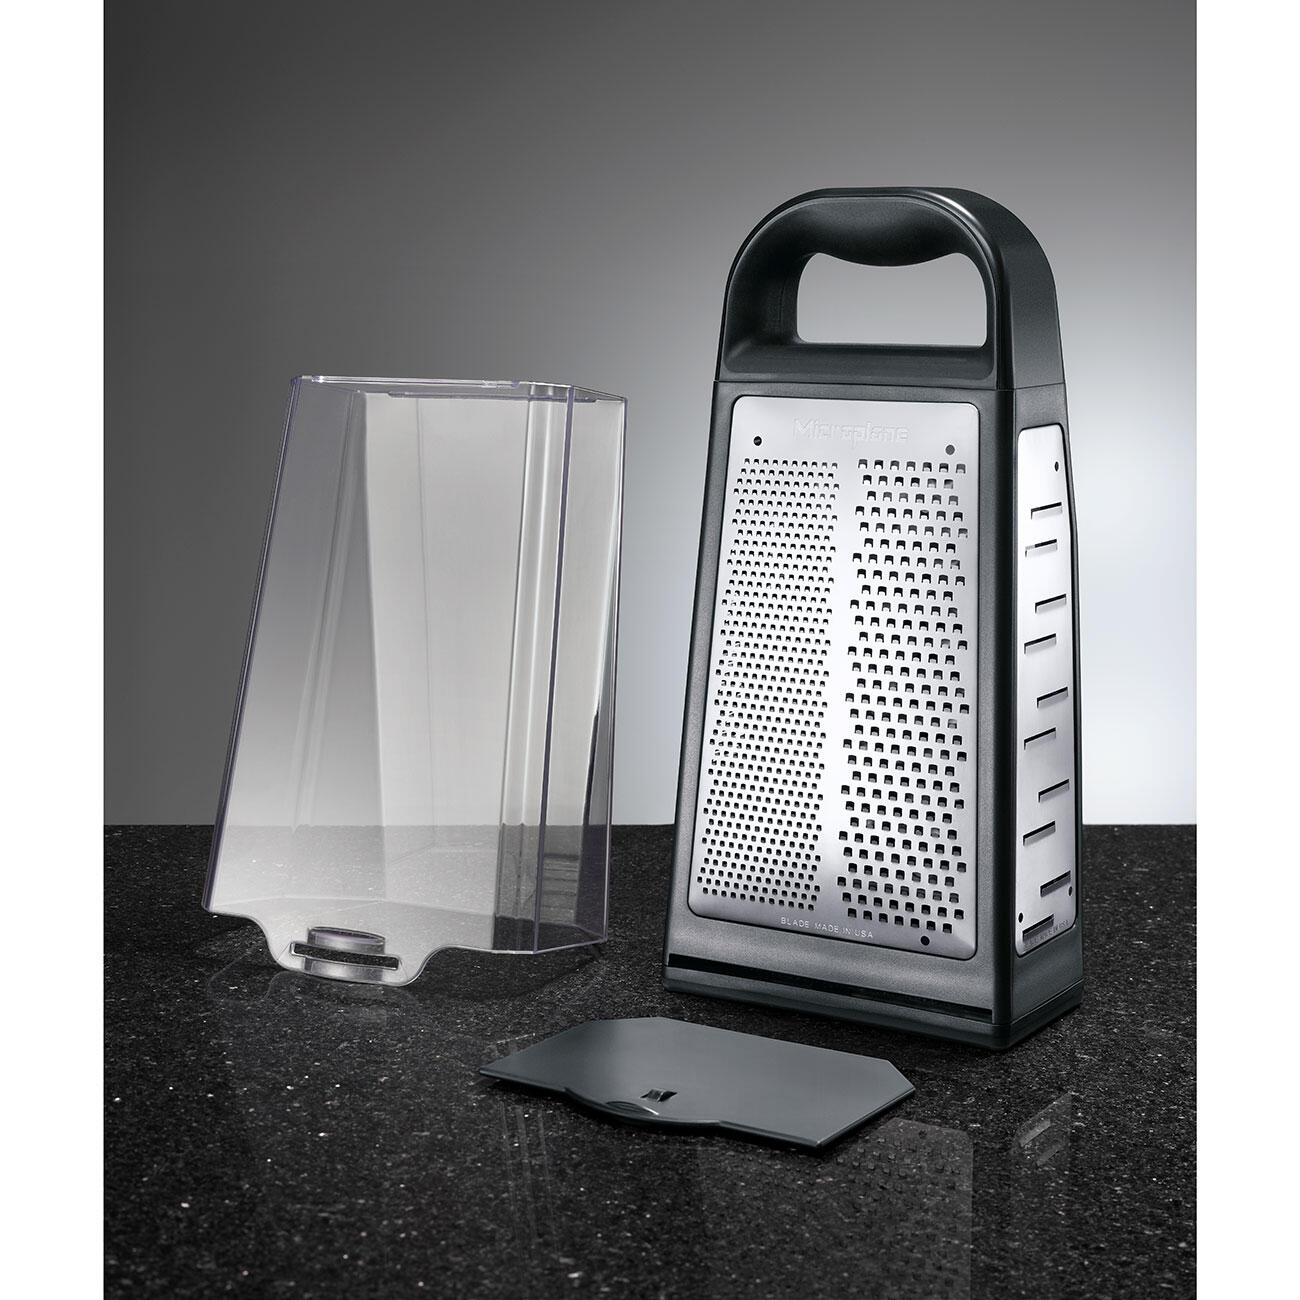 Kitchen accessories - Grater in NYC